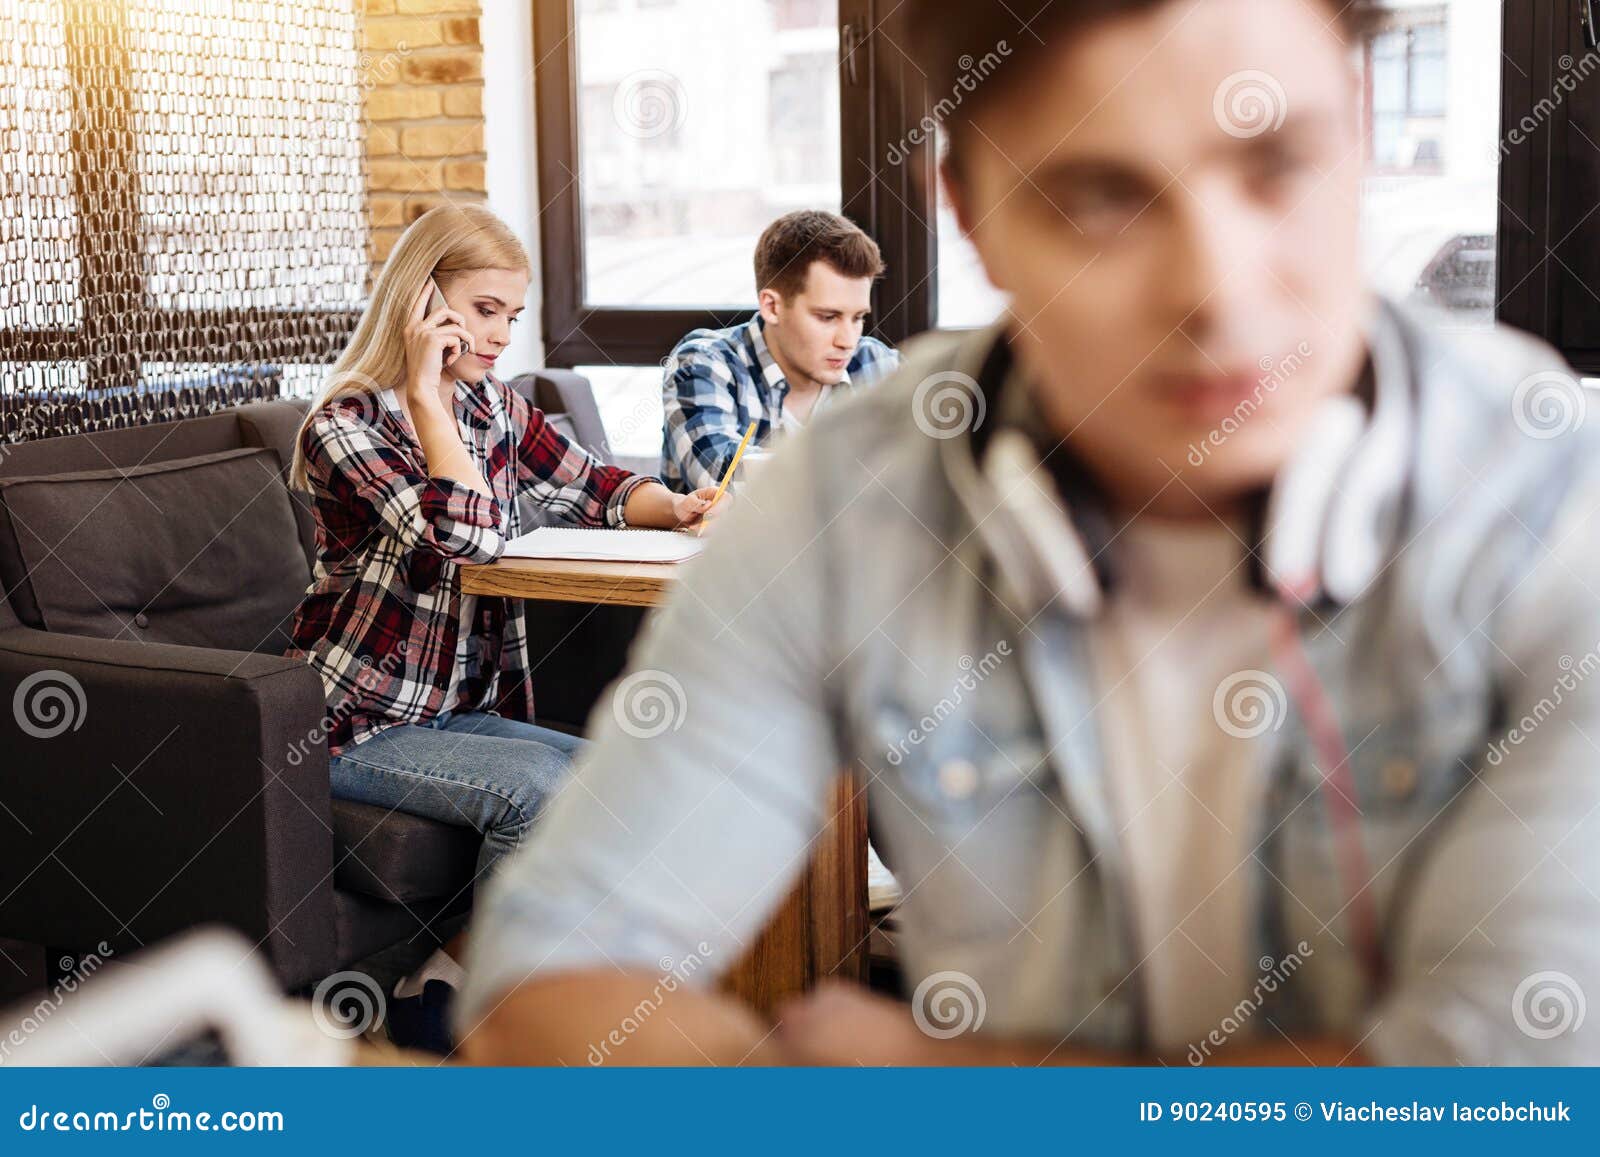 Pleasant Friends Sitting In The Cafe Stock Image Image Of Modern Hairstyle 90240595